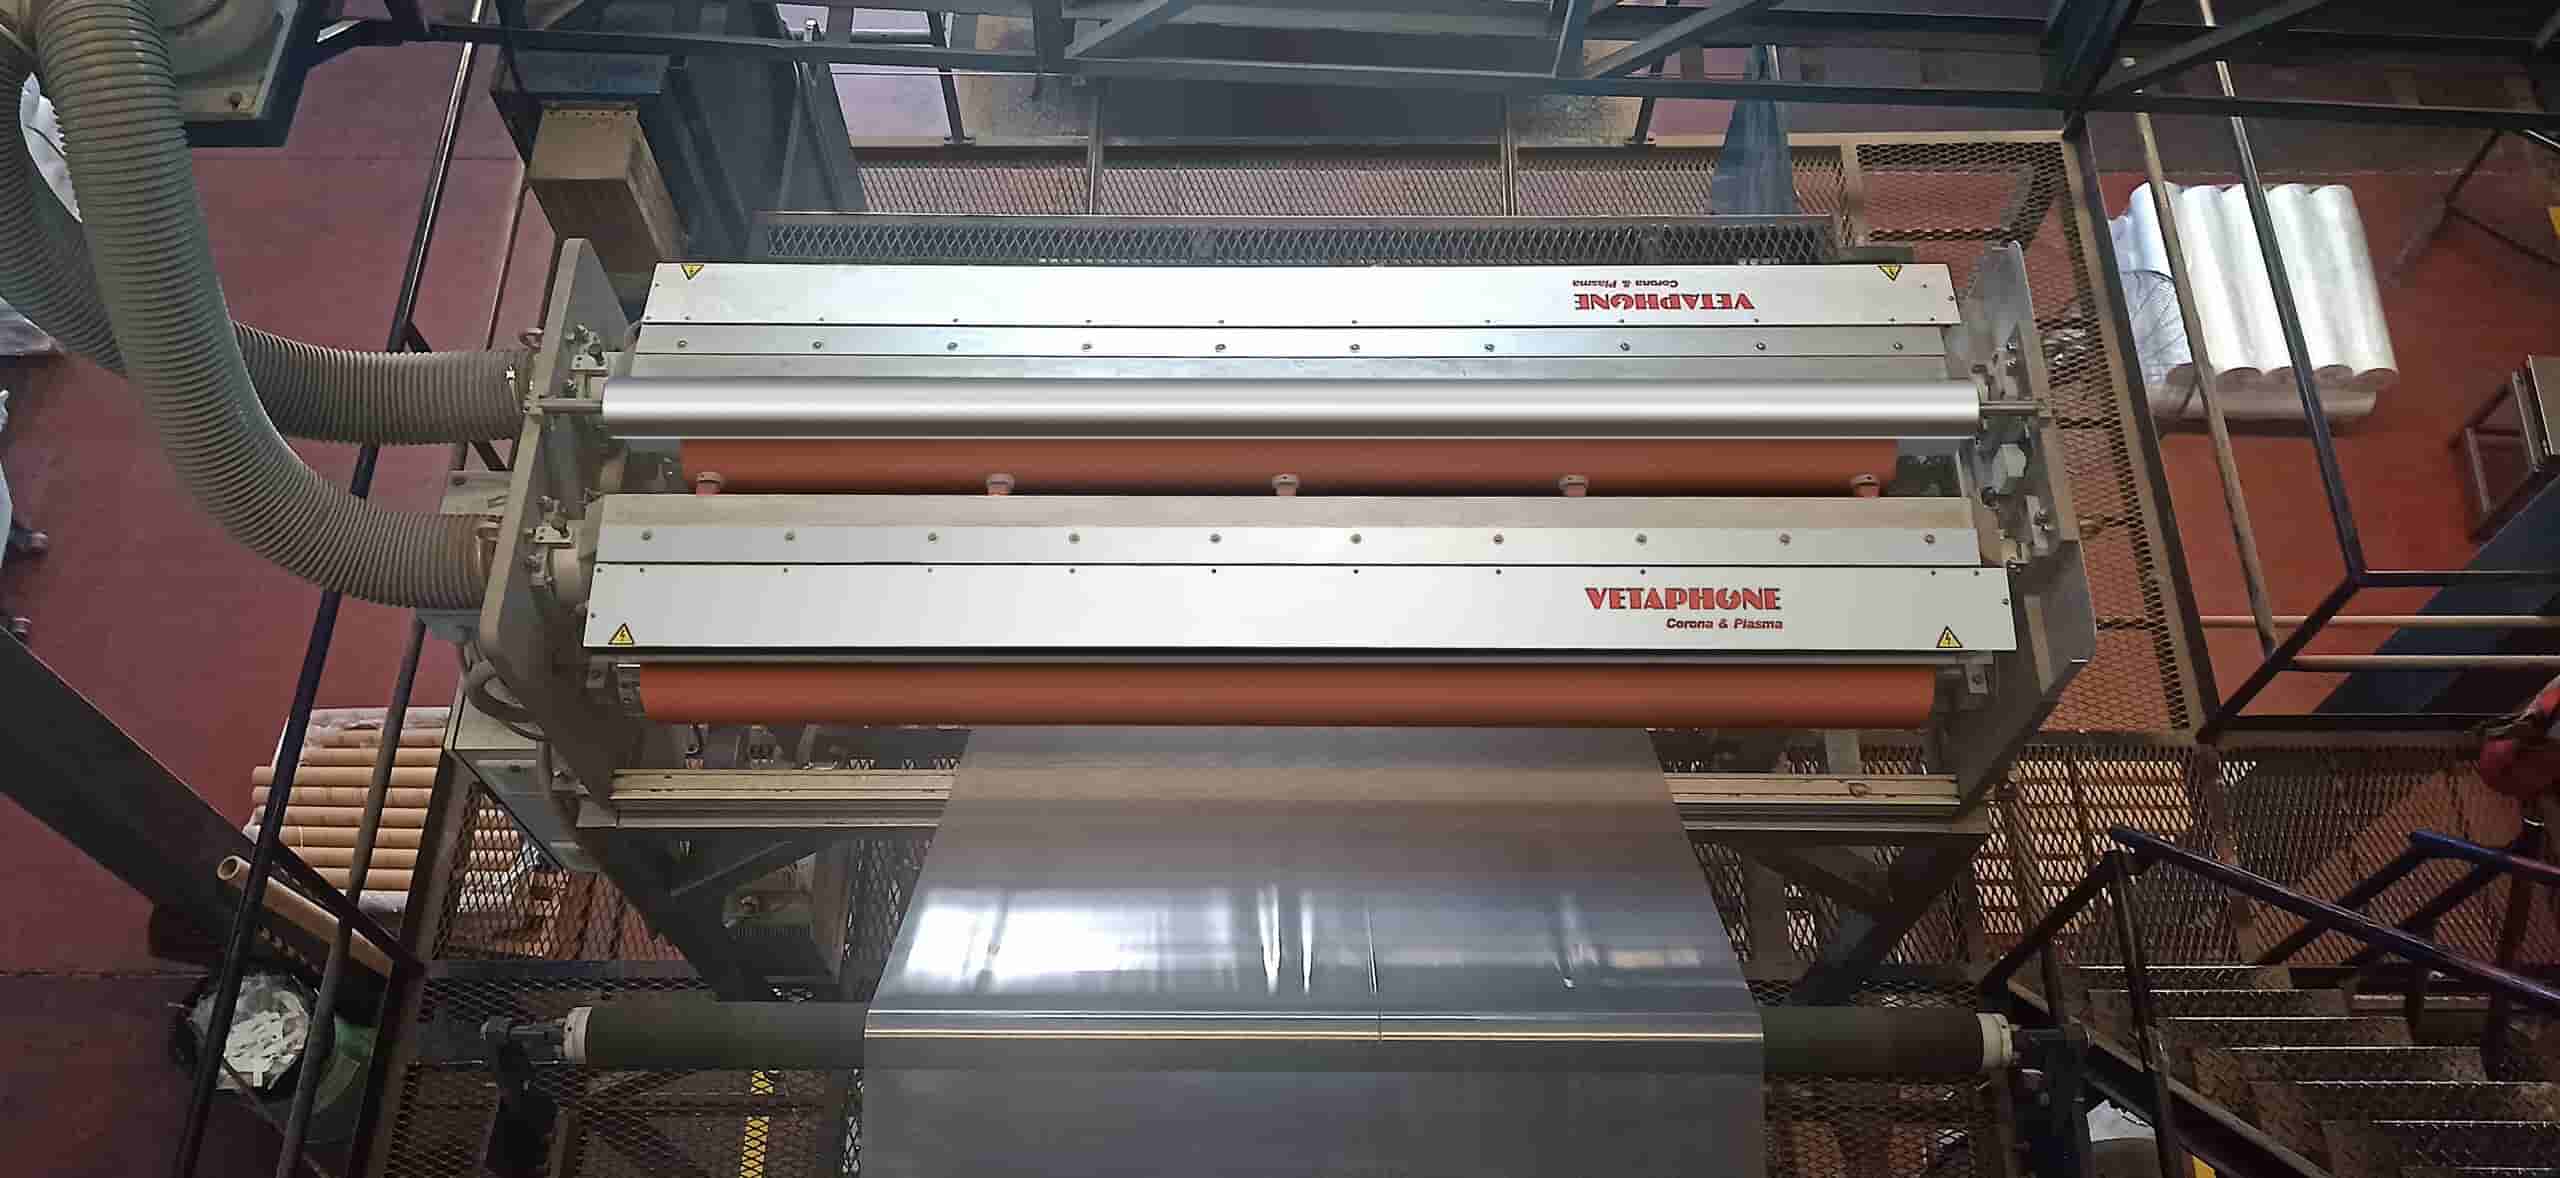 Dinpe chooses Vetaphone for better quality extrusion